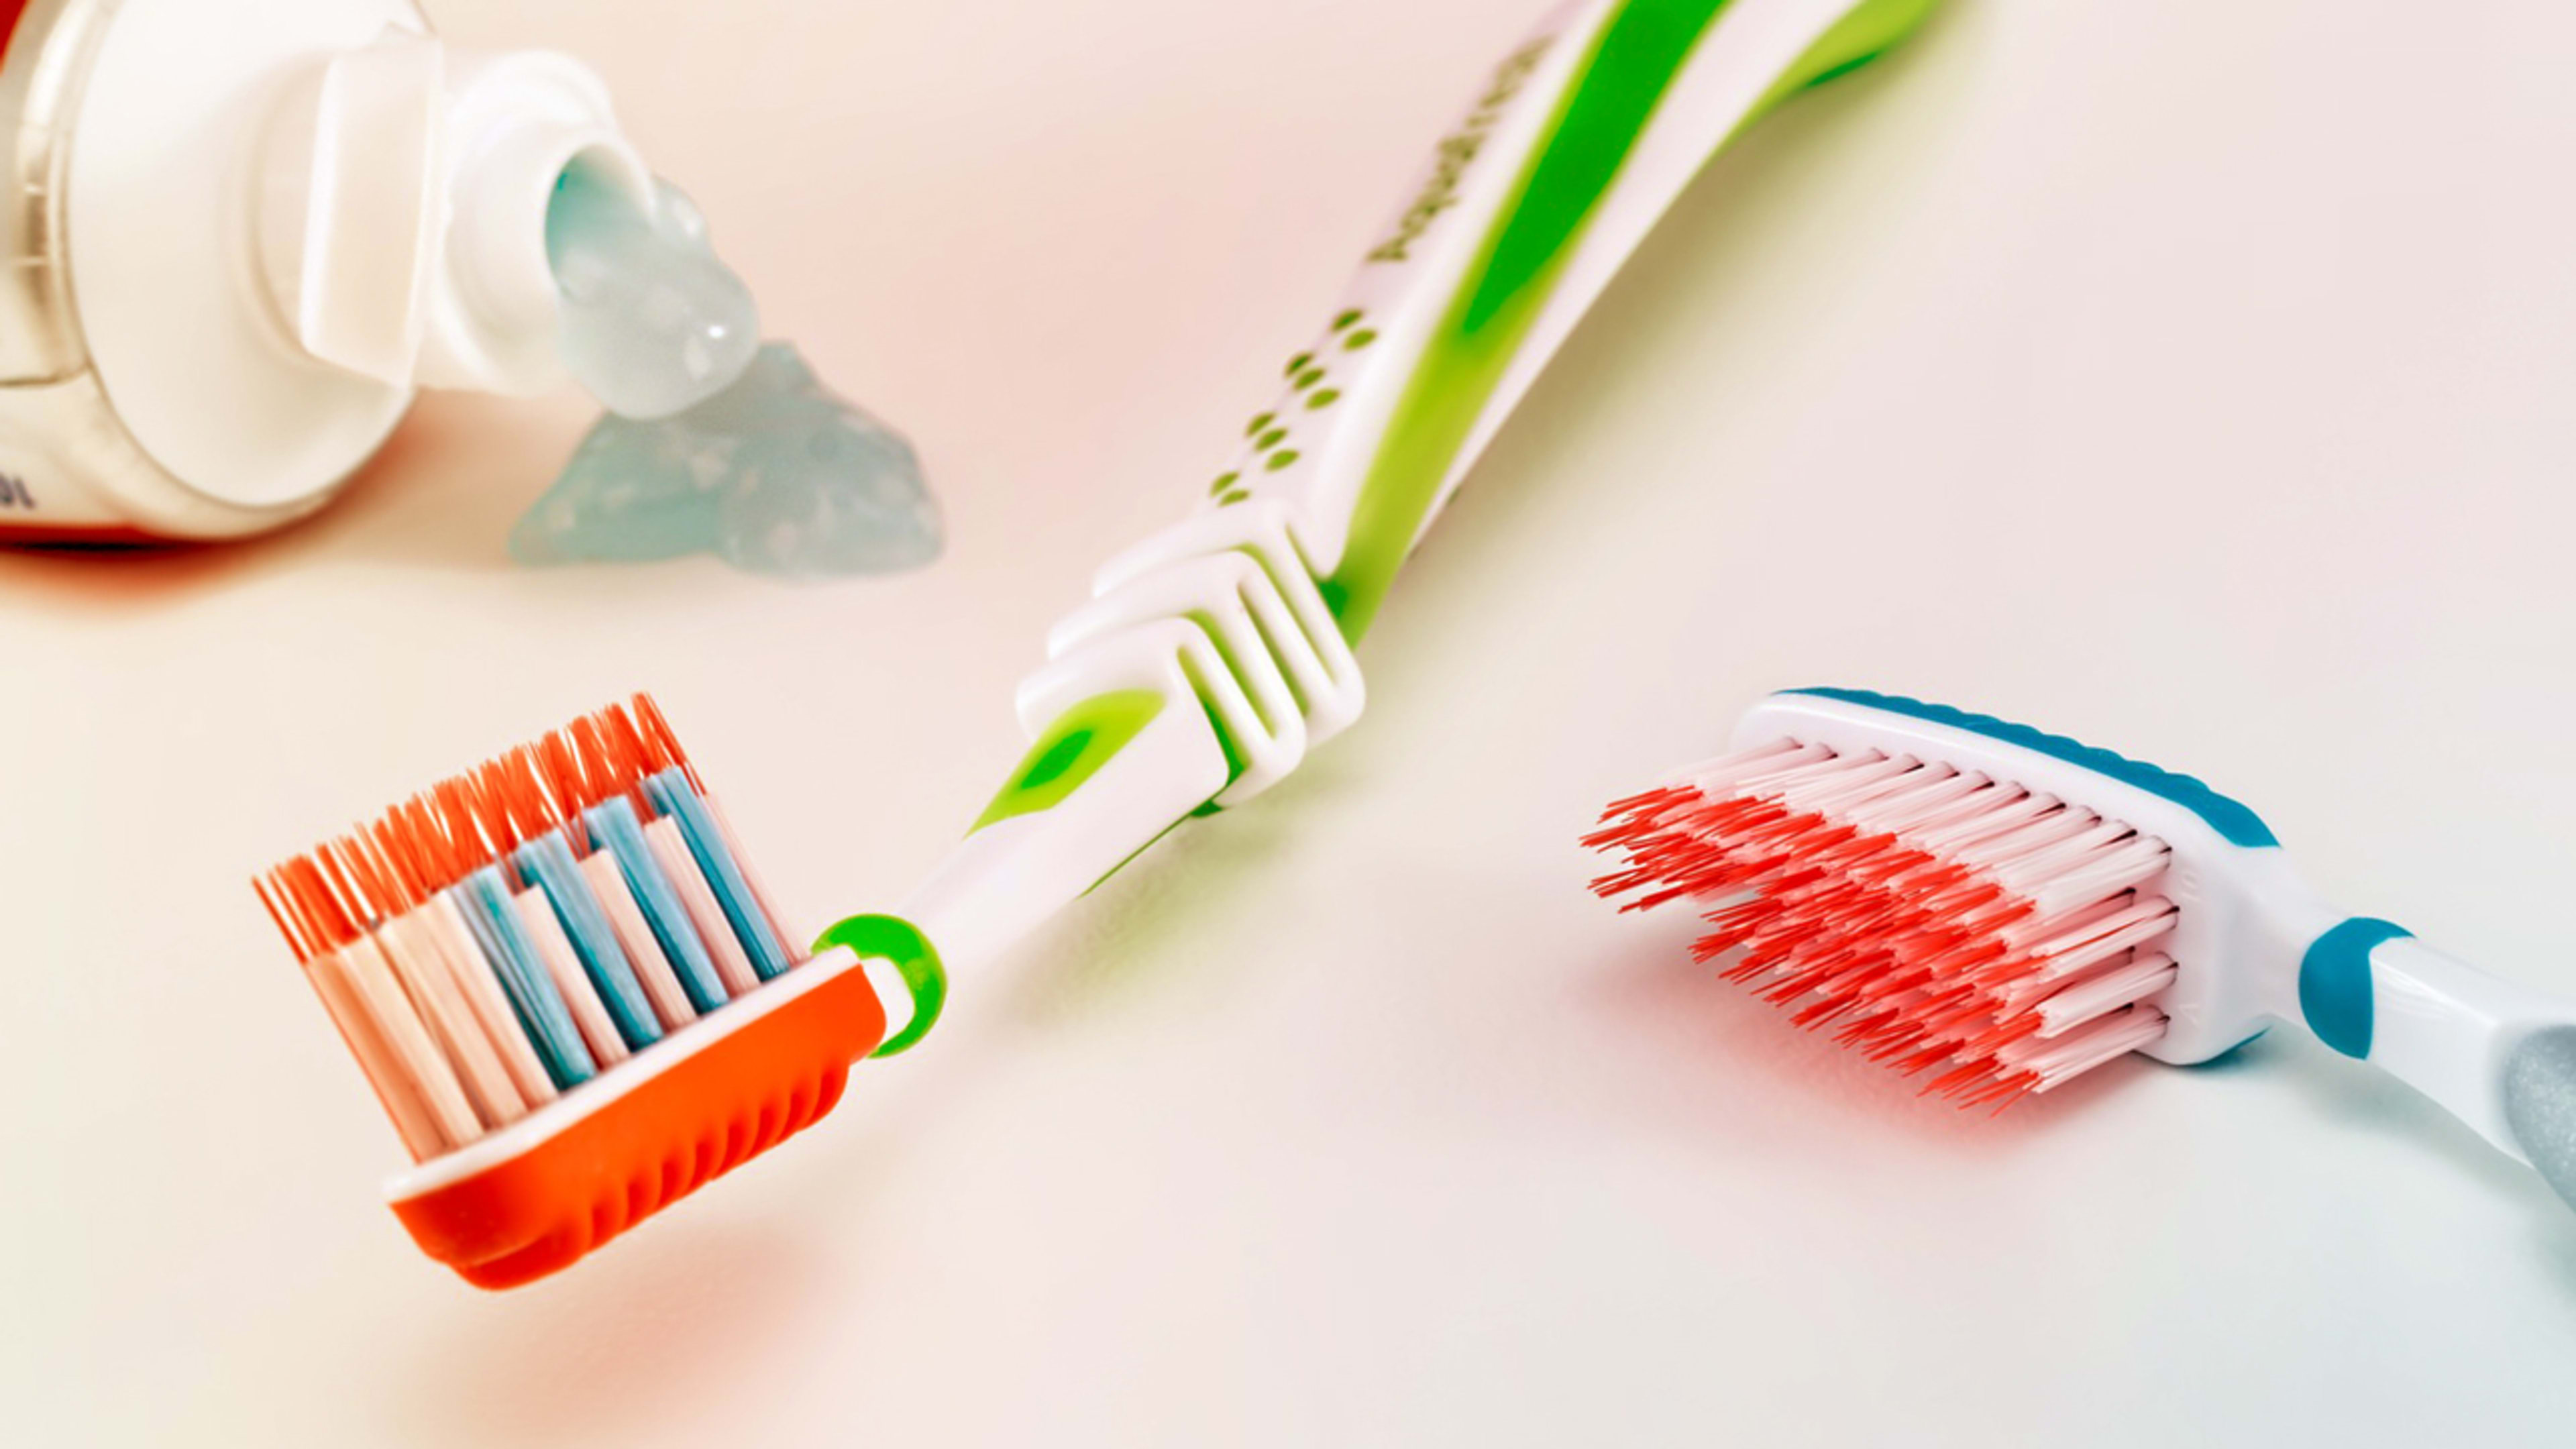 Brand WTF of the week: Brushbox somehow made a toothbrush sexist